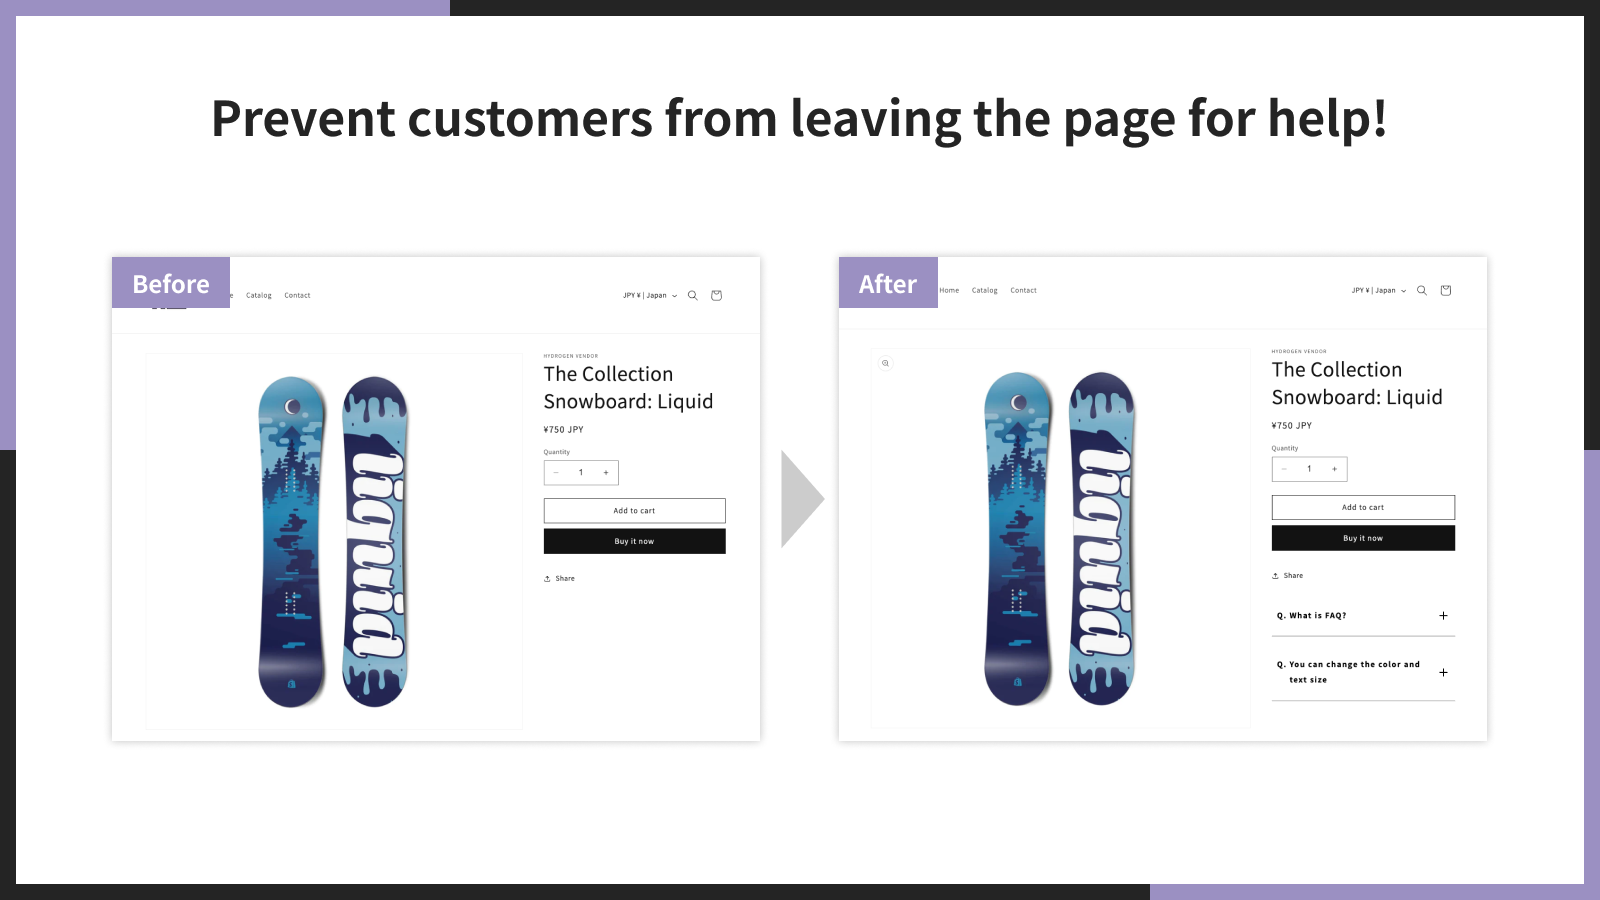 Prevent customers from leaving the page for help!